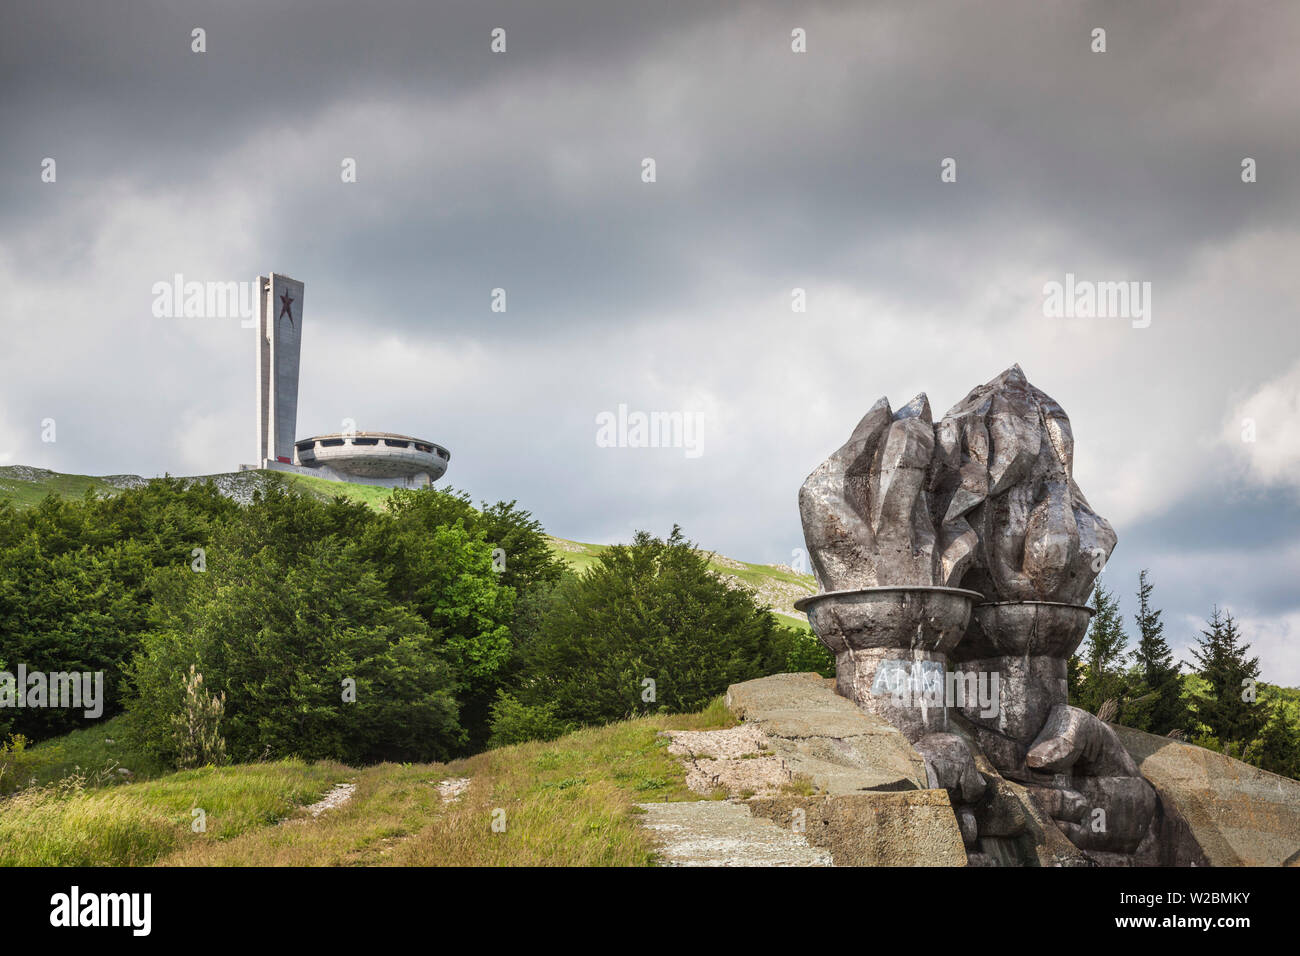 Bulgaria, Central Mountains, Shipka, Shipka Pass, ruins of the Soviet-era Buzludzha Monument, built to honor the Bulgarian Communist Party in1981, late afternoon Stock Photo